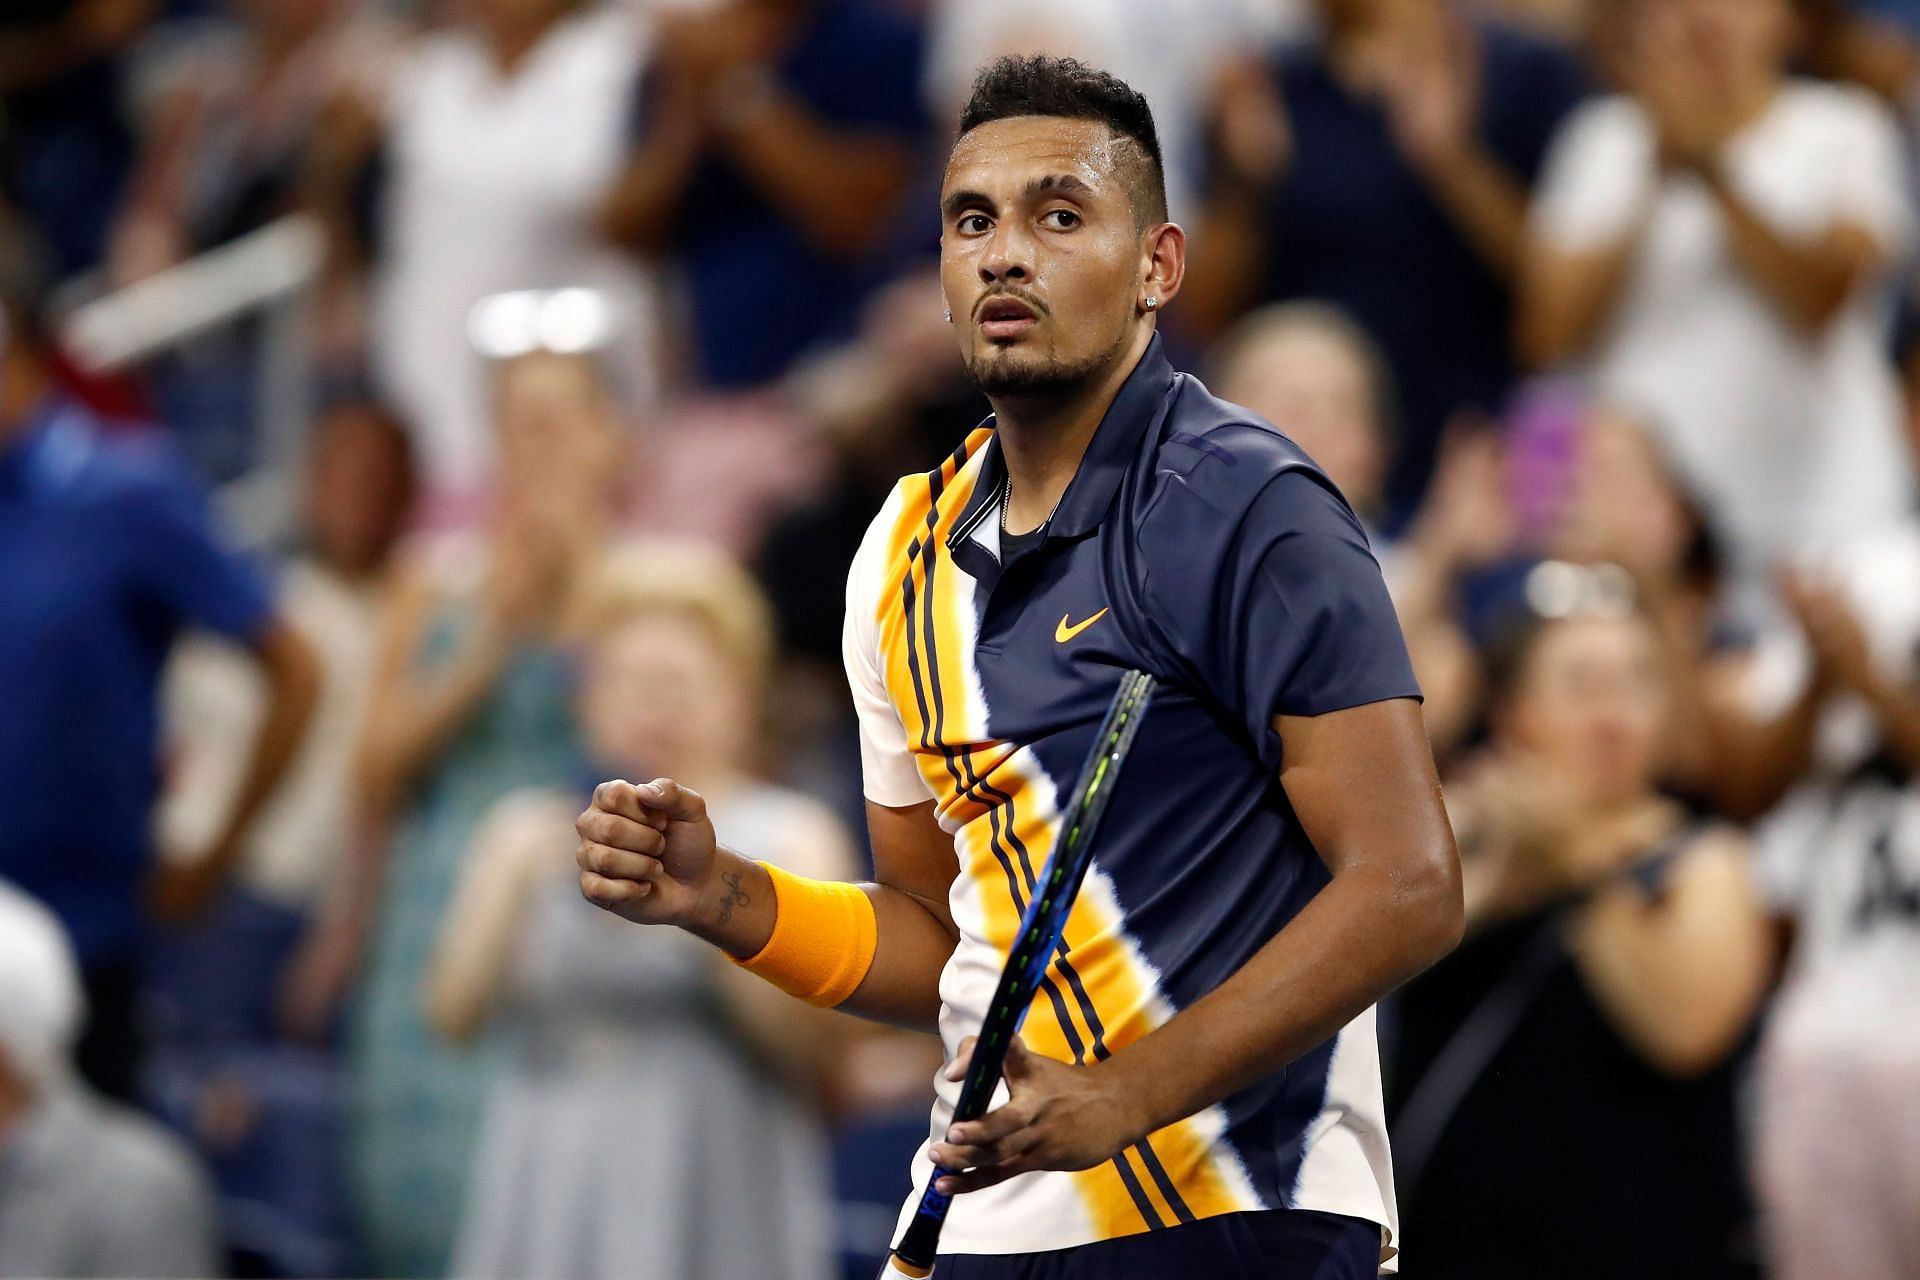 Nick Kyrgios is set to begin his US Open tour